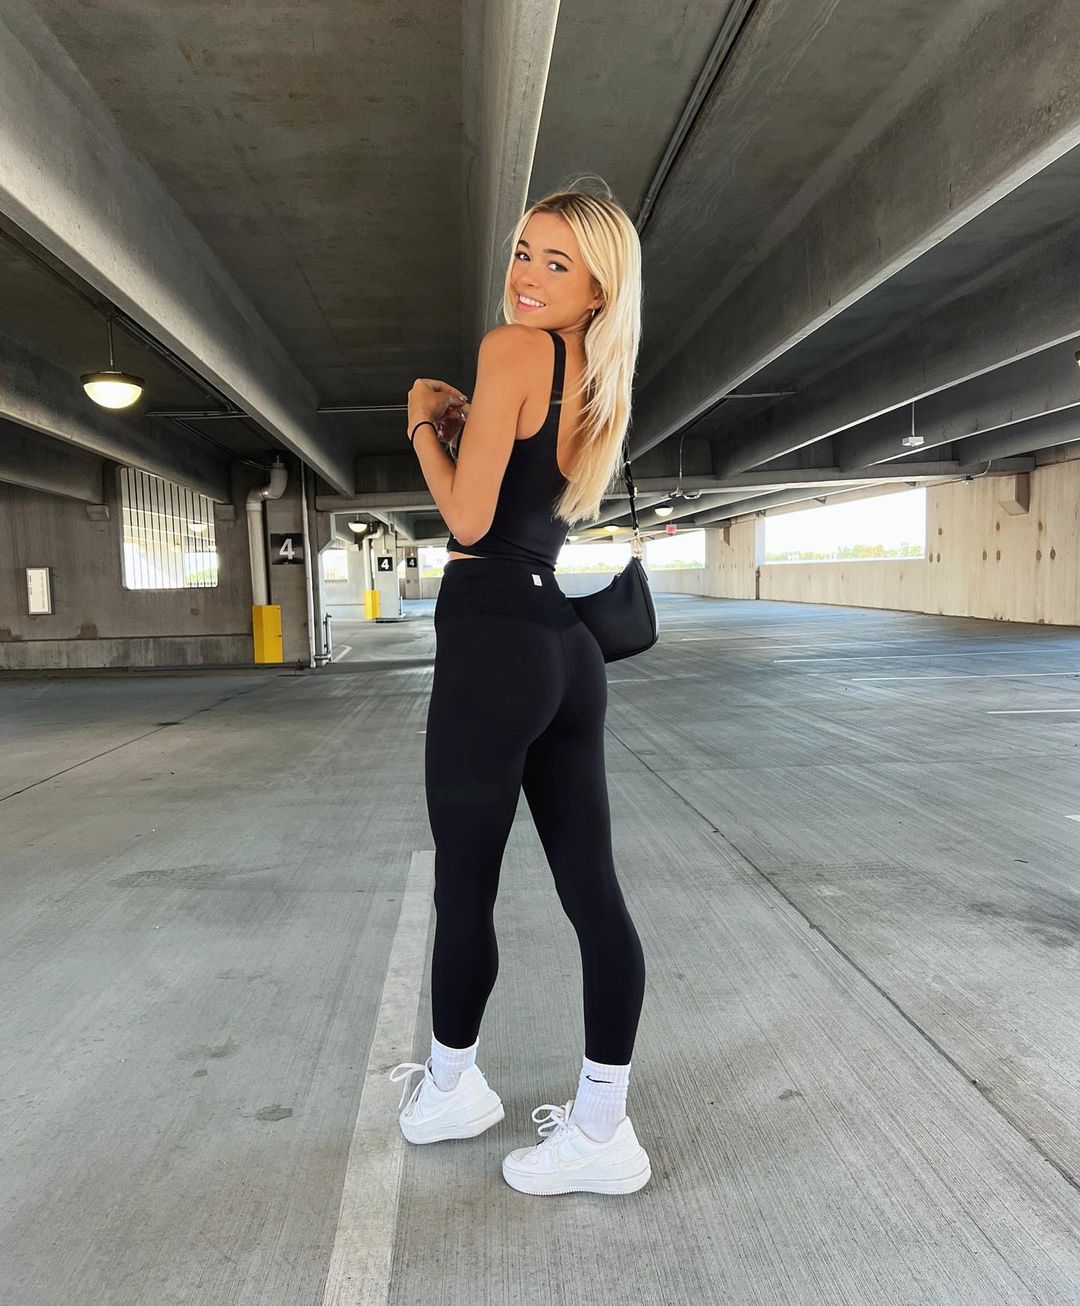 LSU Gymnast Olivia Dunne Goes Viral Rocking Tight Outfit In Parking ...